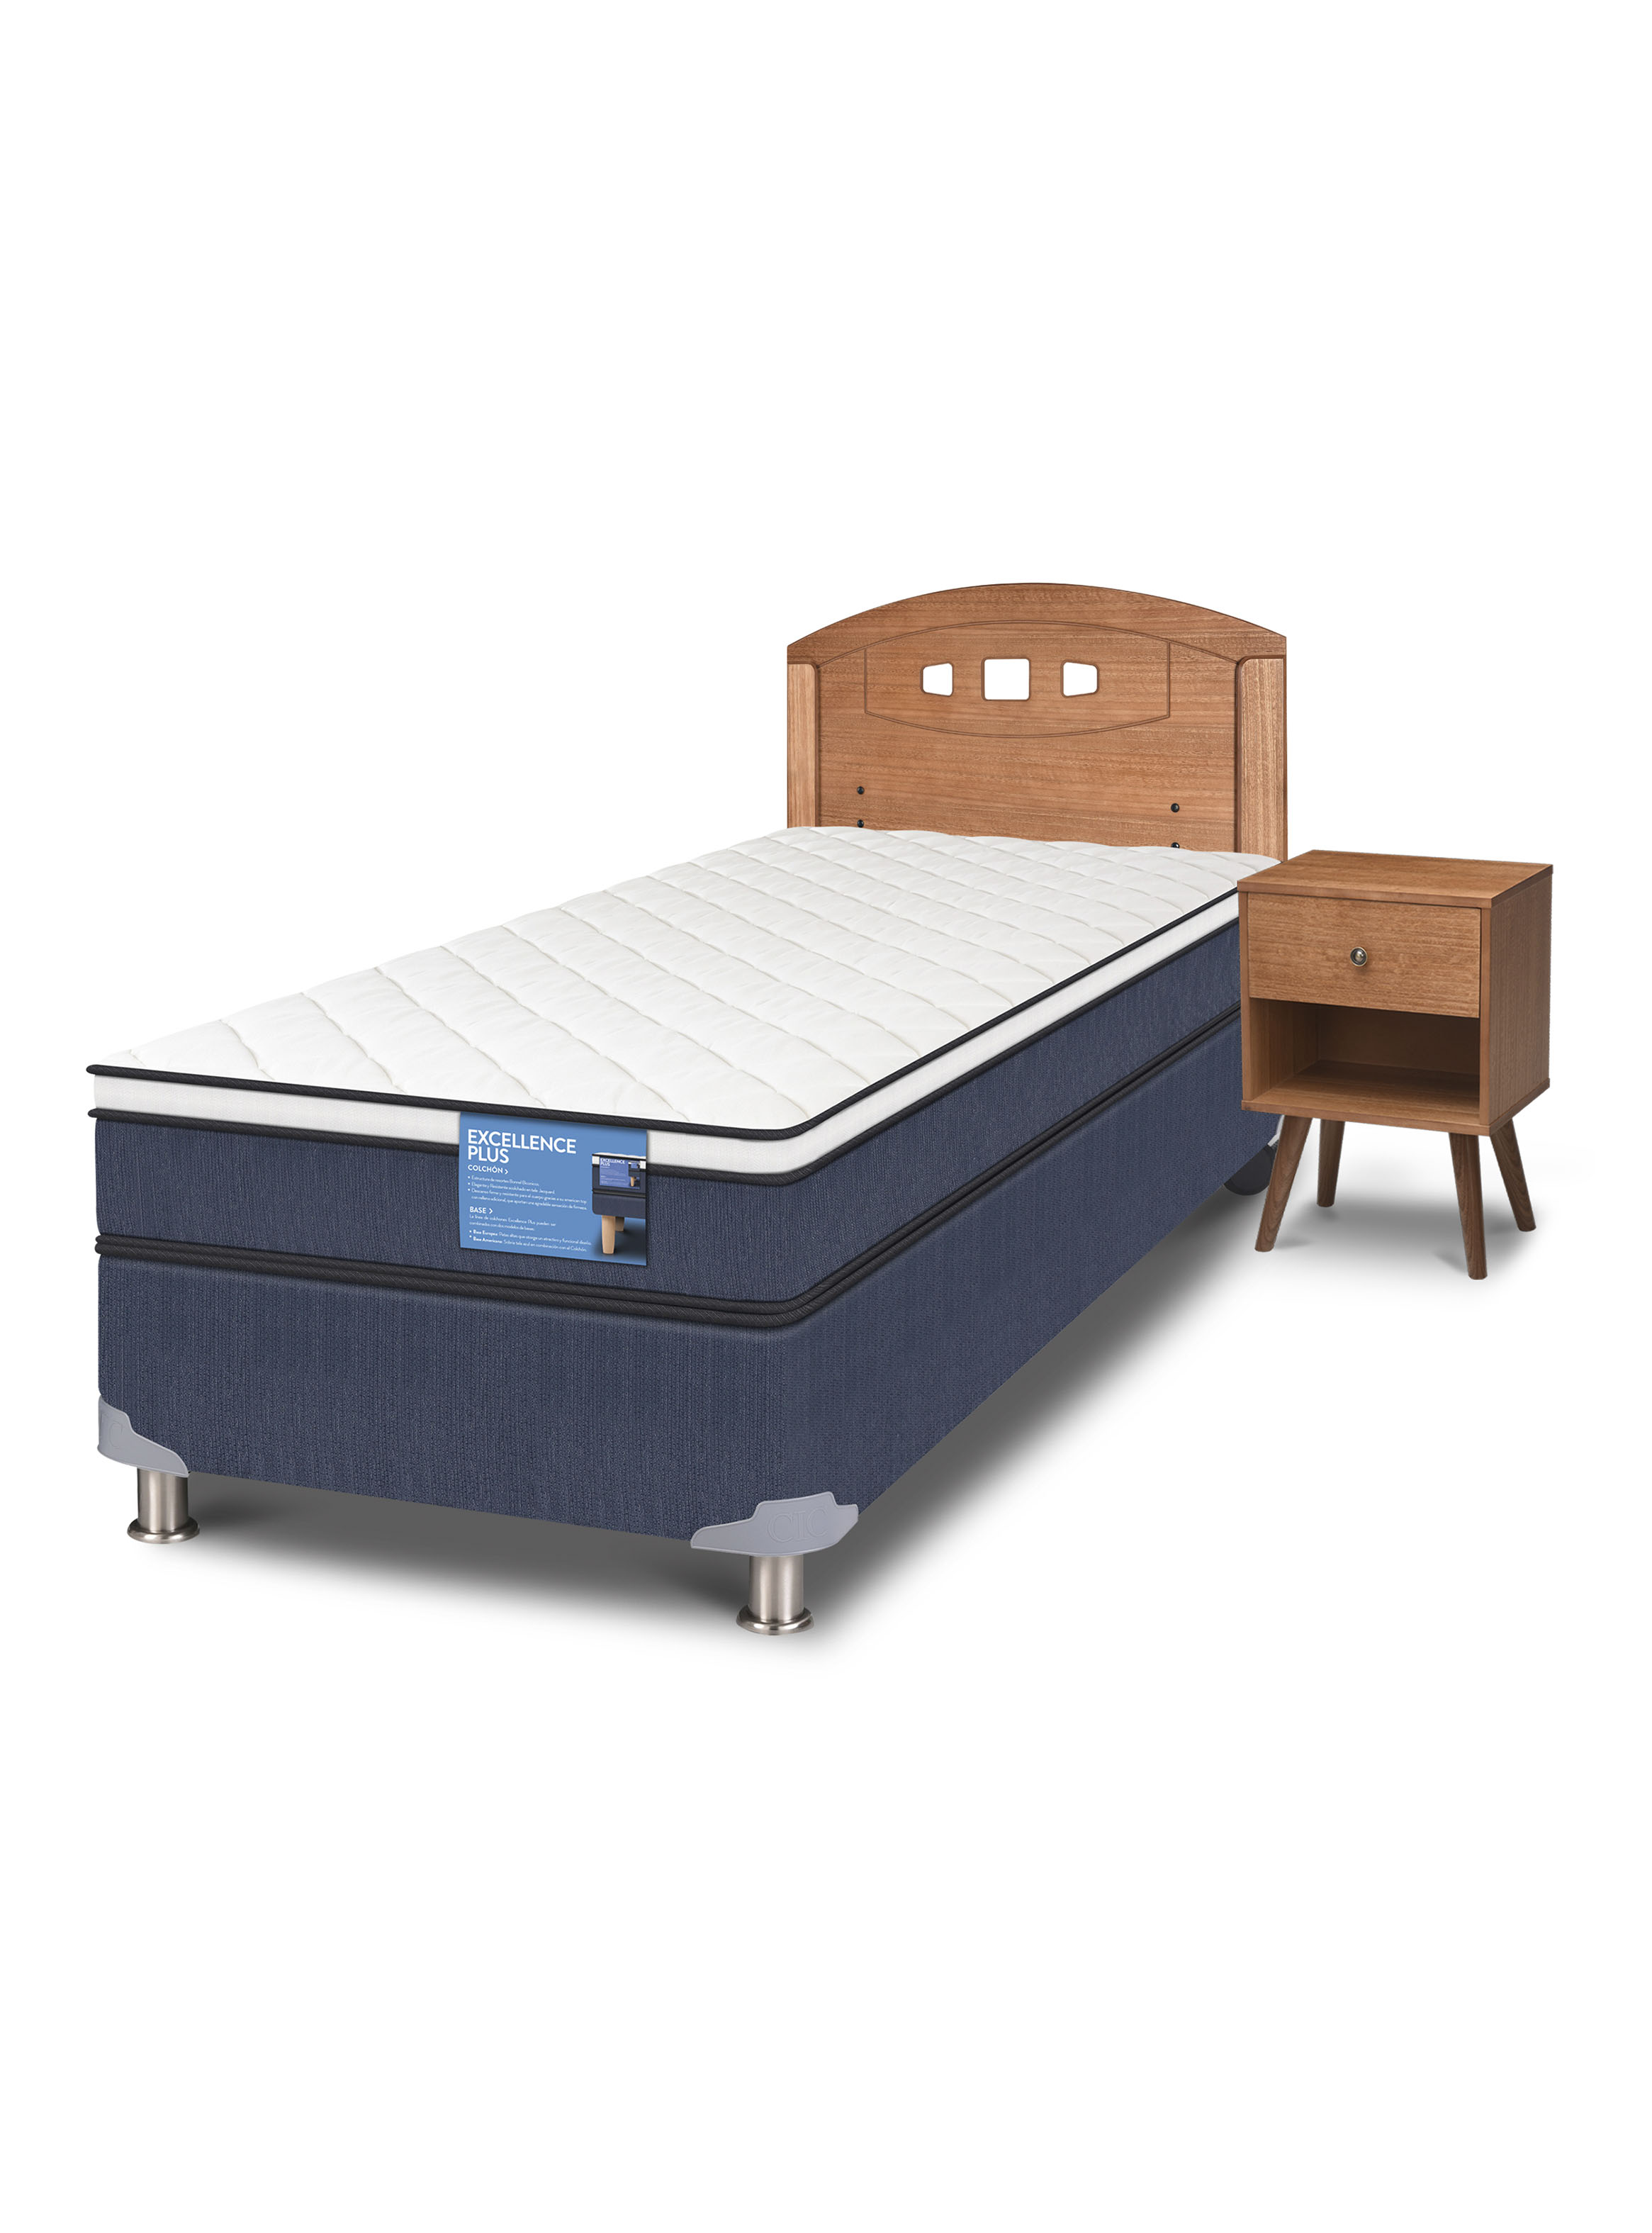 Cama Americana Excellence Plus 1 Plaza New Gales Sin Textil N